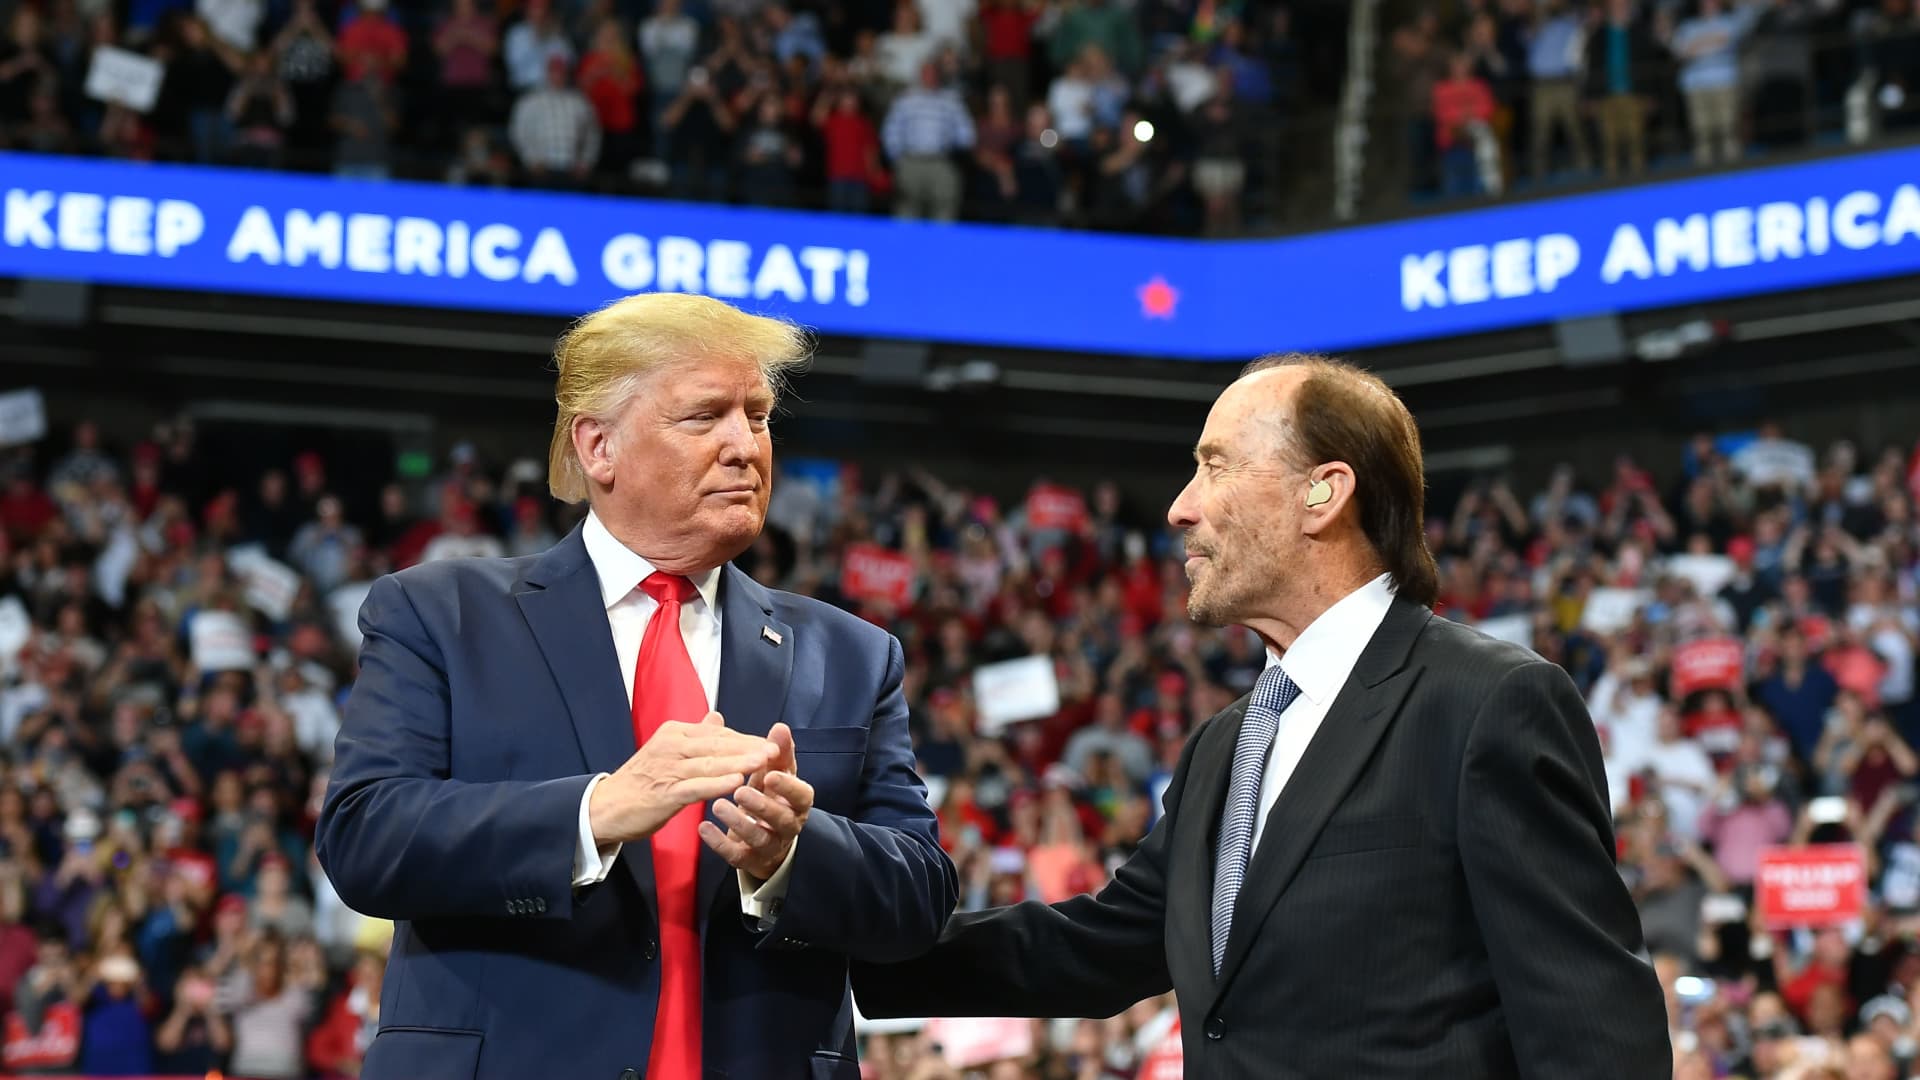 Former U.S. President Donald Trump, left, stands with singer Lee Greenwood during a rally at Rupp Arena in Lexington, Kentucky, on Nov. 4, 2019.